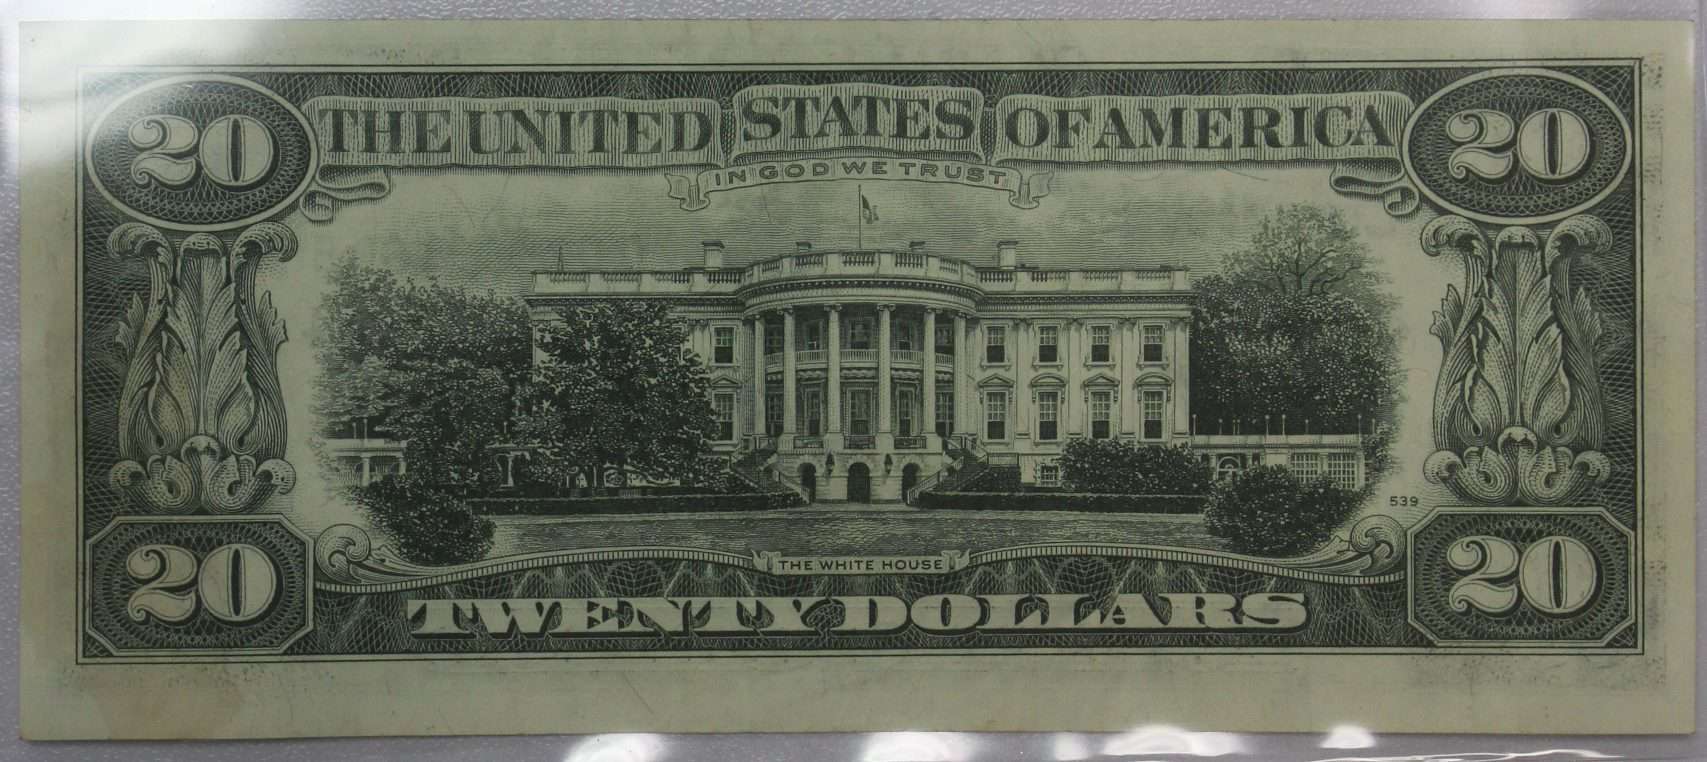 The Reverse of the 1977 20 Dollar Bill